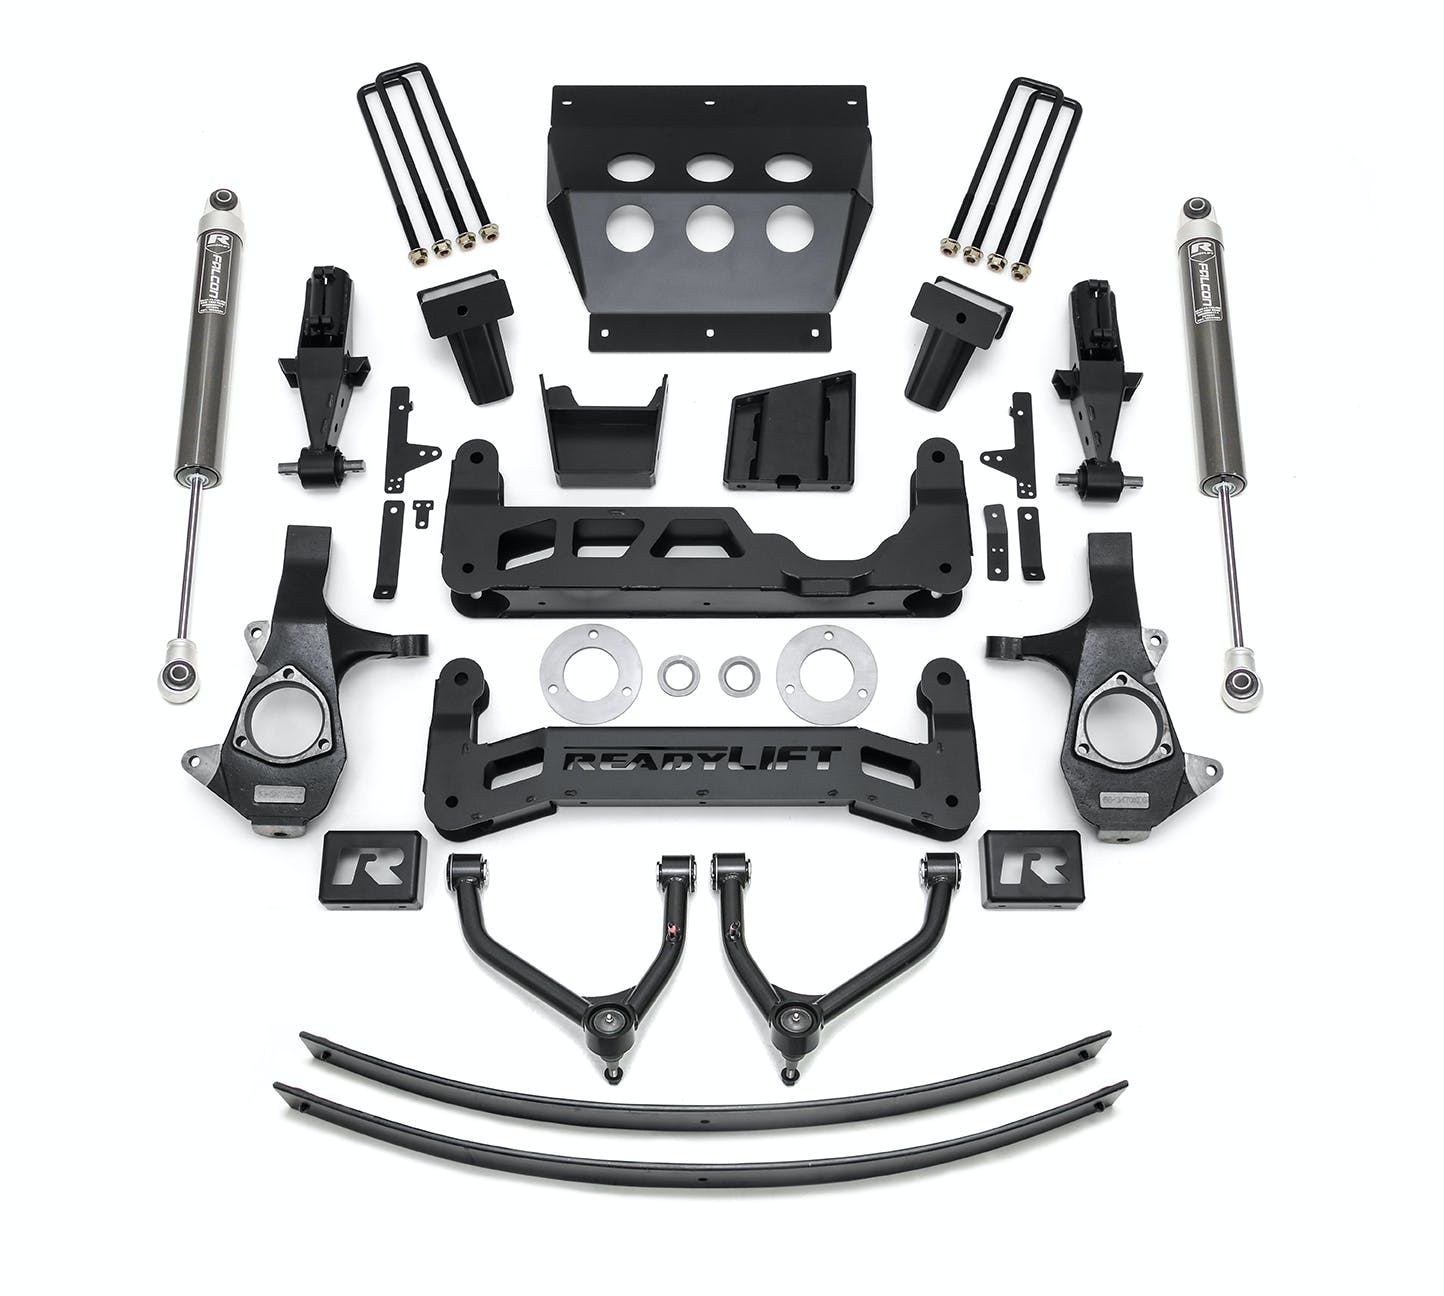 ReadyLIFT 44-34910 9" Big Lift Kit for Cast Steel OE Upper Control Arms, Falcon 1.1 Monotube Shock